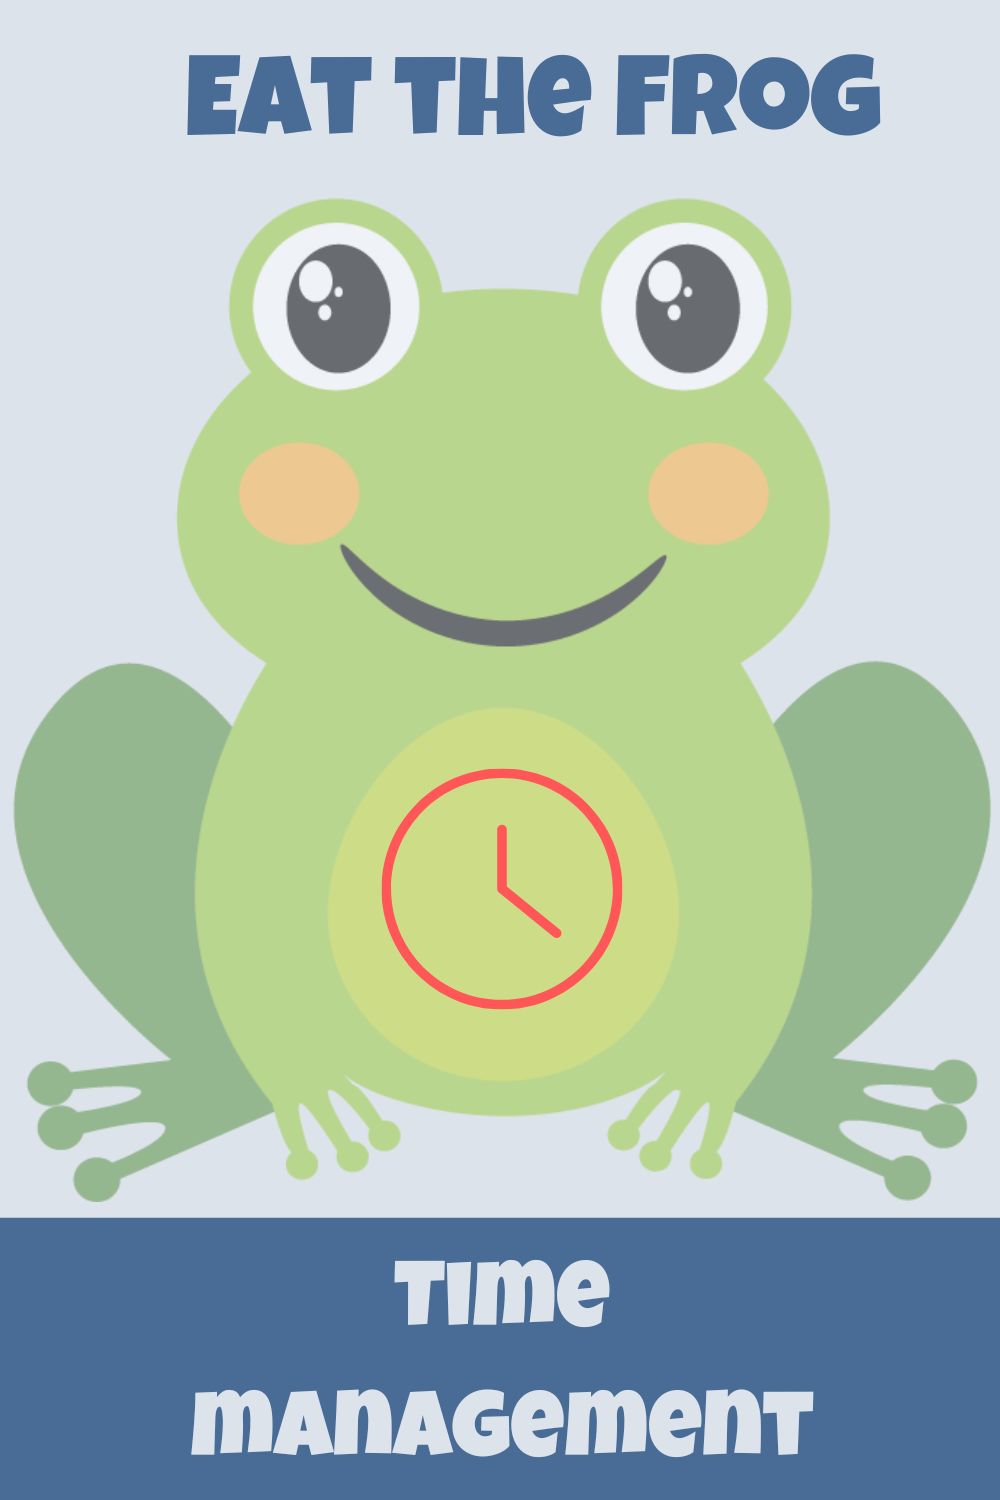 Conquer Your Day: How the “Eat the Frog” Method Can Boost Your Time Management